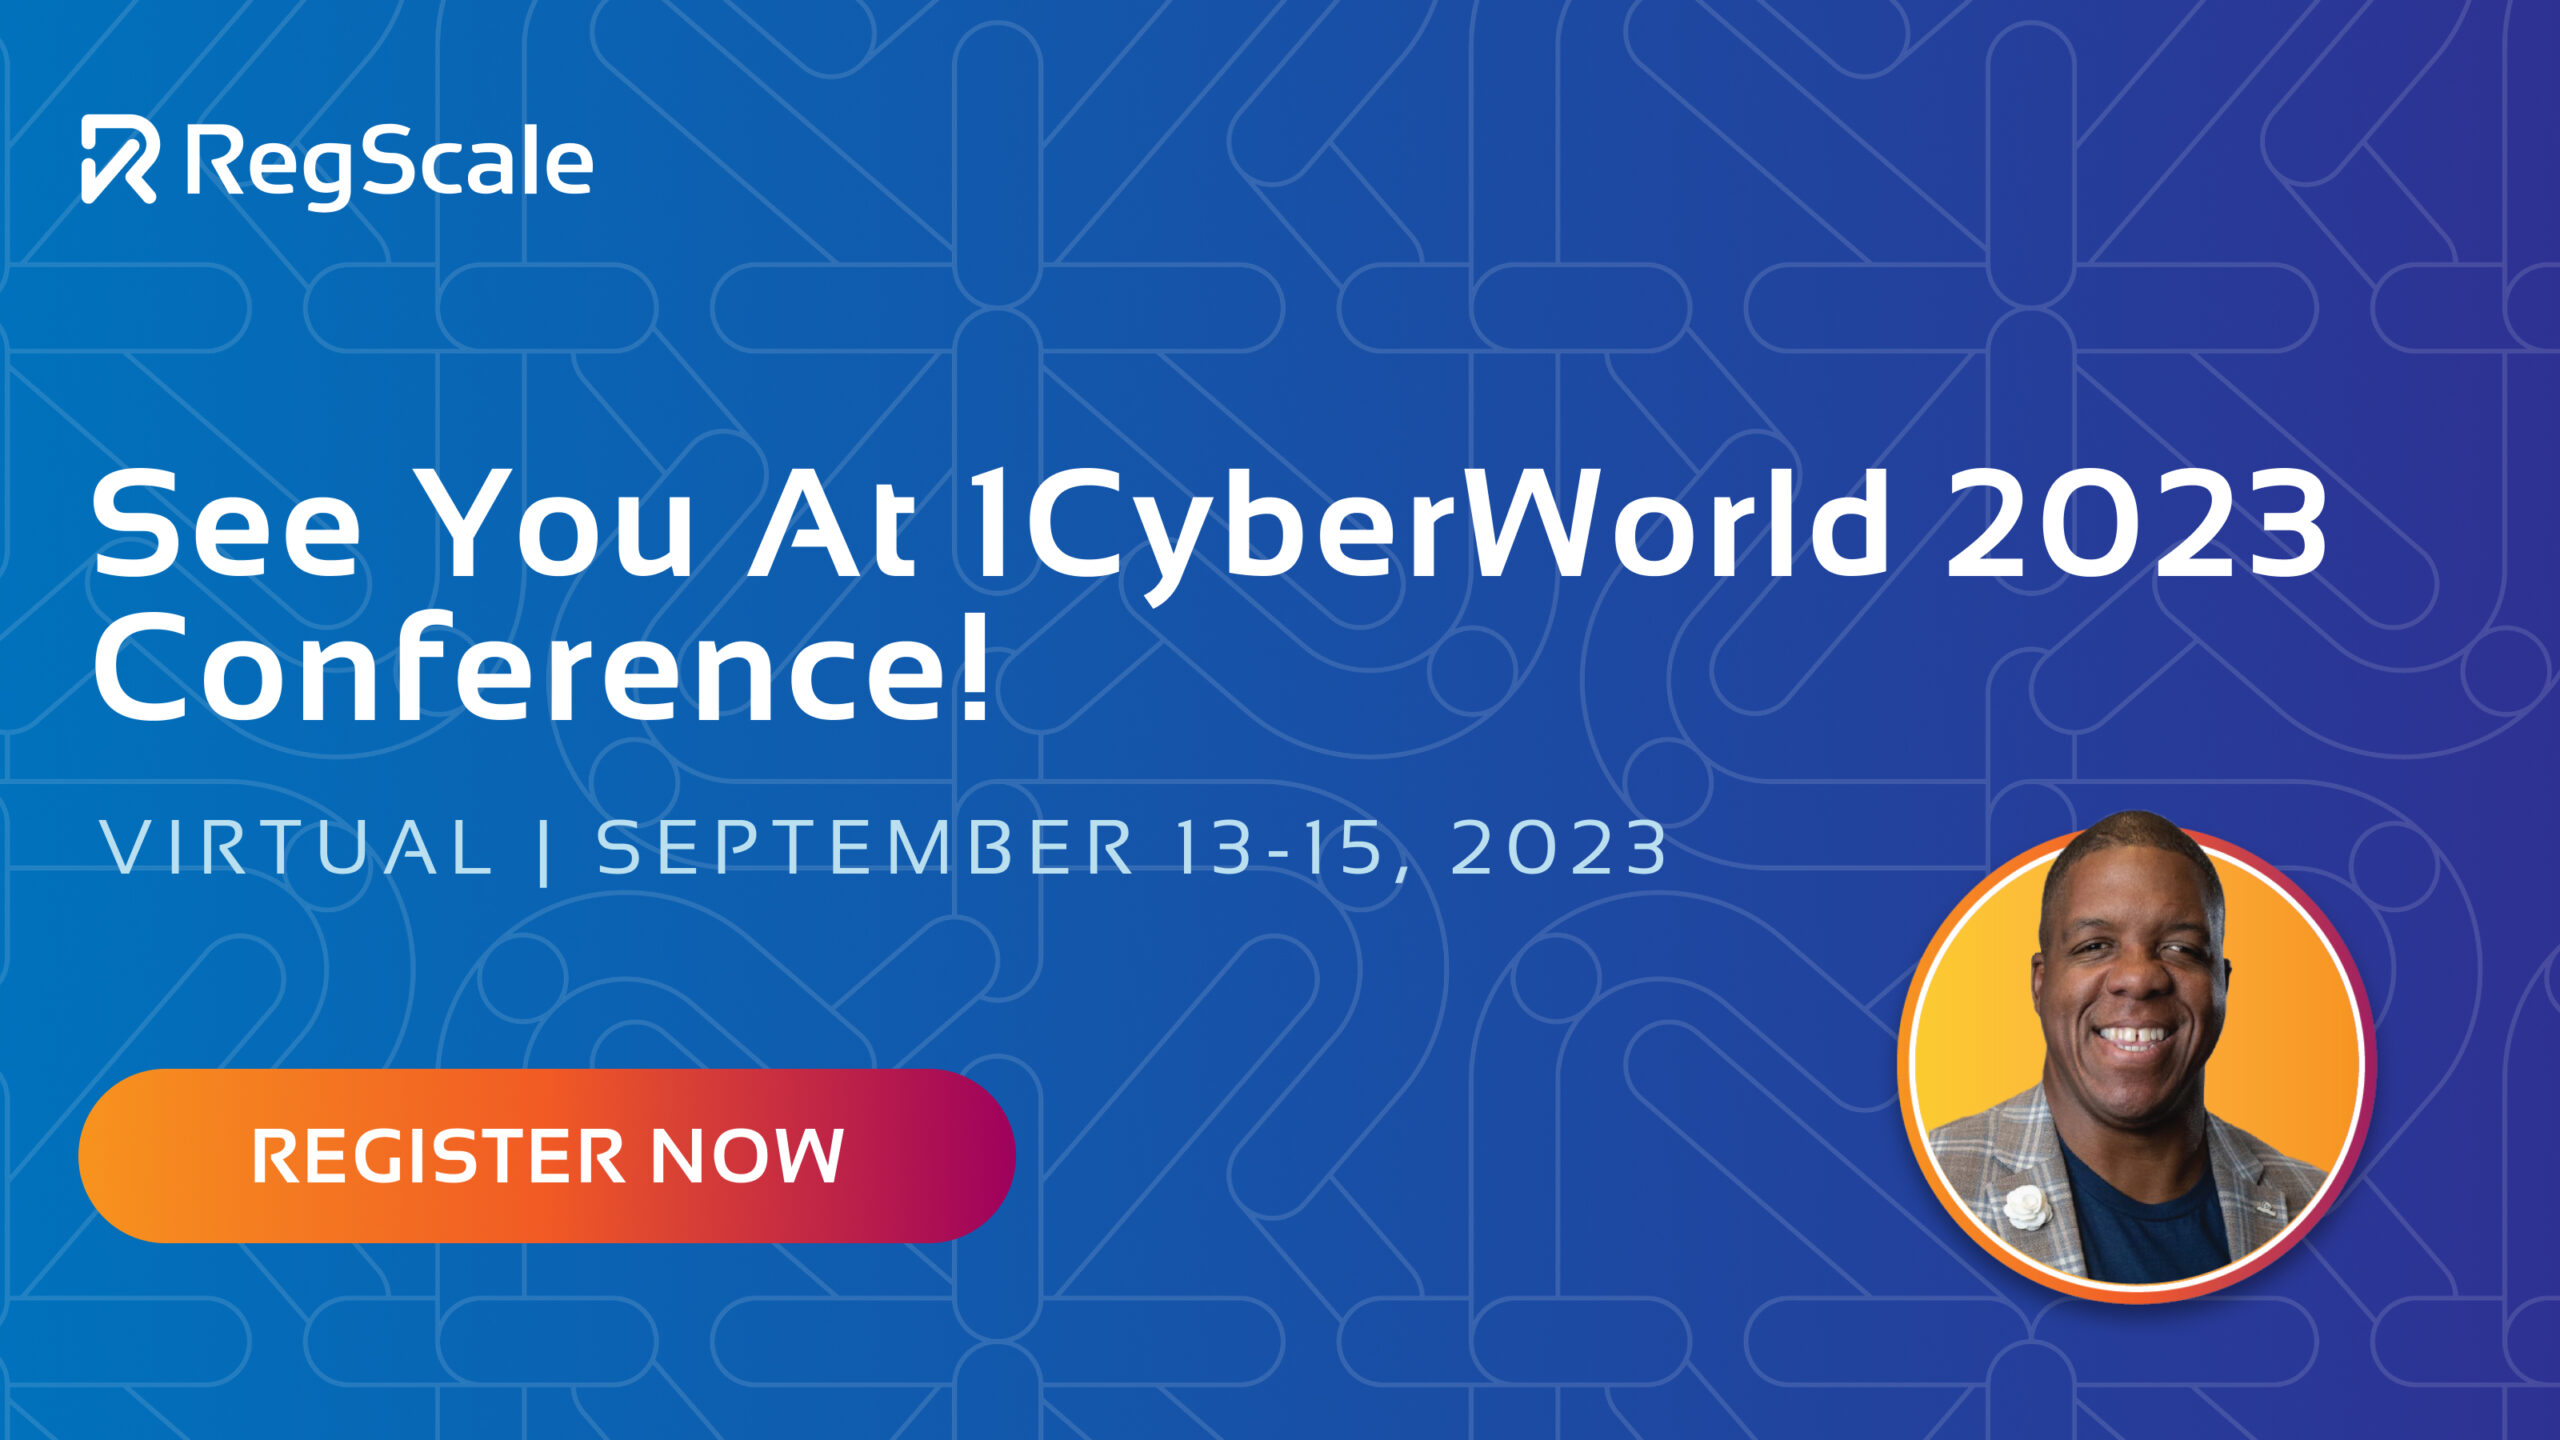 See you at 1CyberWorld 2023 Conference virtually from September 13th to 15th, where RegScale CISO Larry Whiteside Jr. will be presenting!